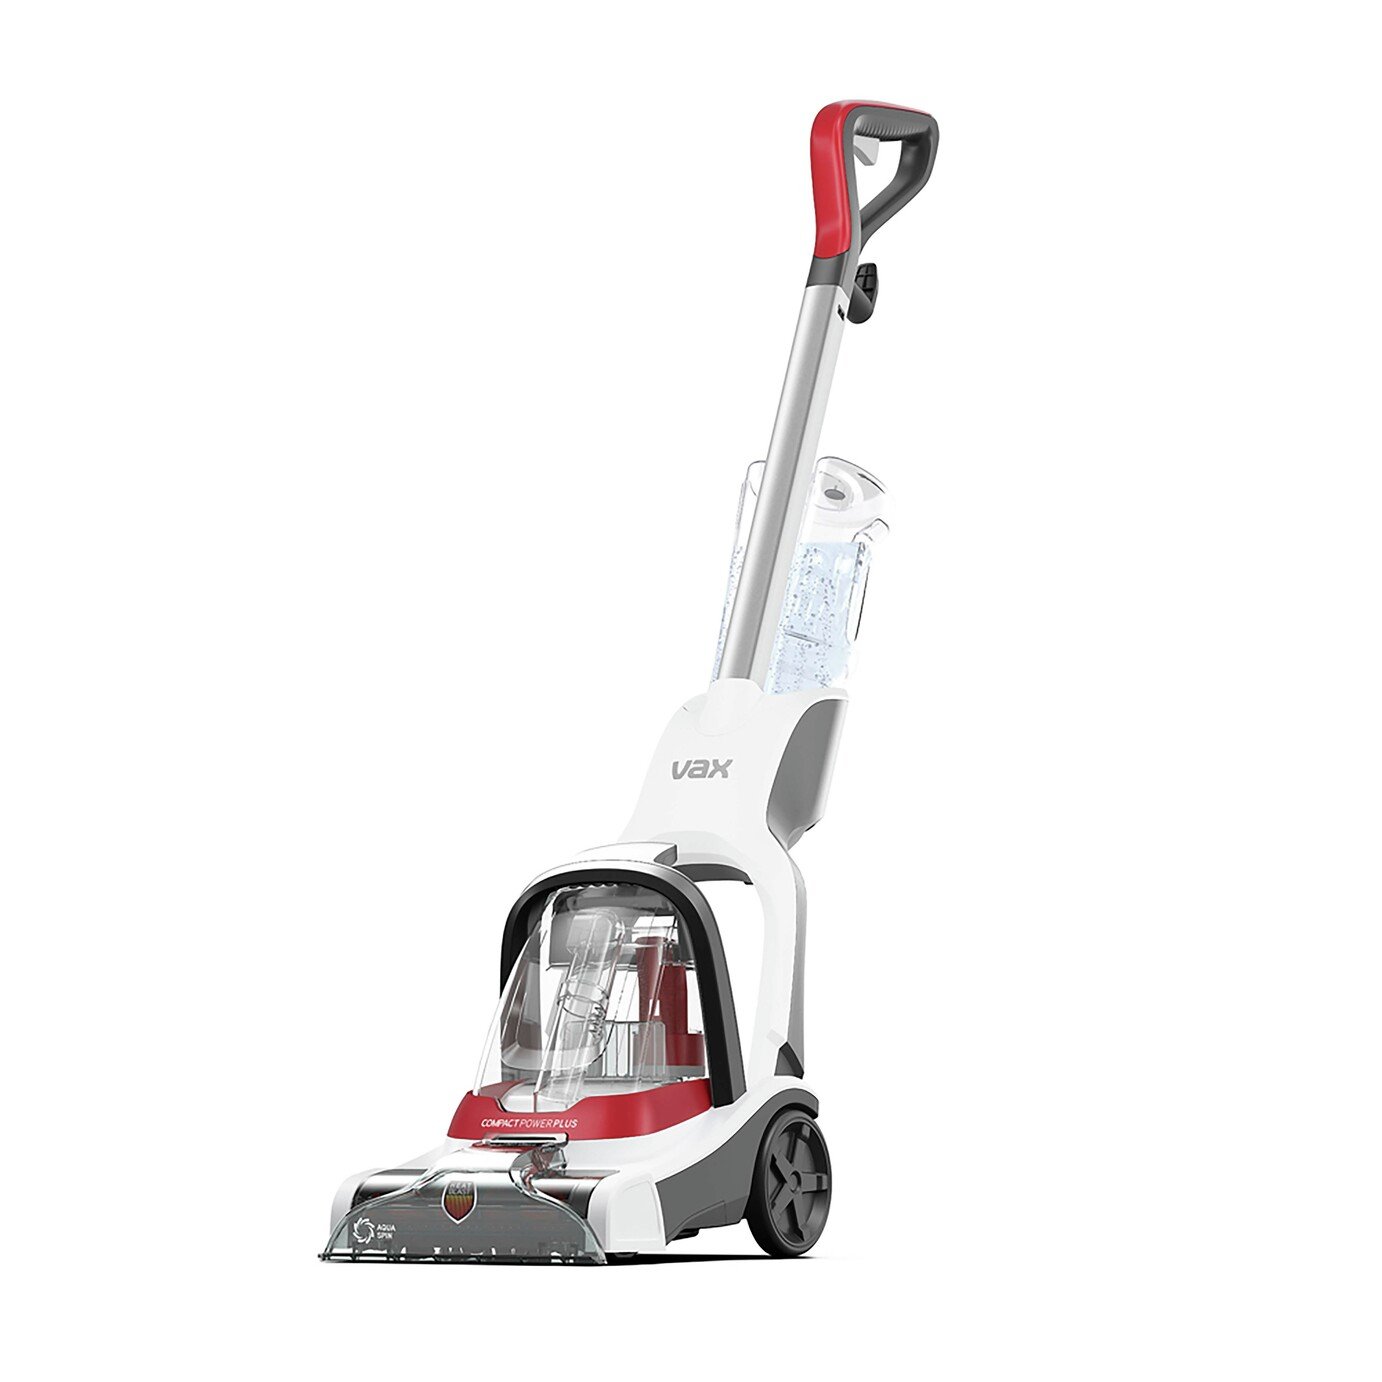 Vax Compact Power Plus Upright Carpet Cleaner